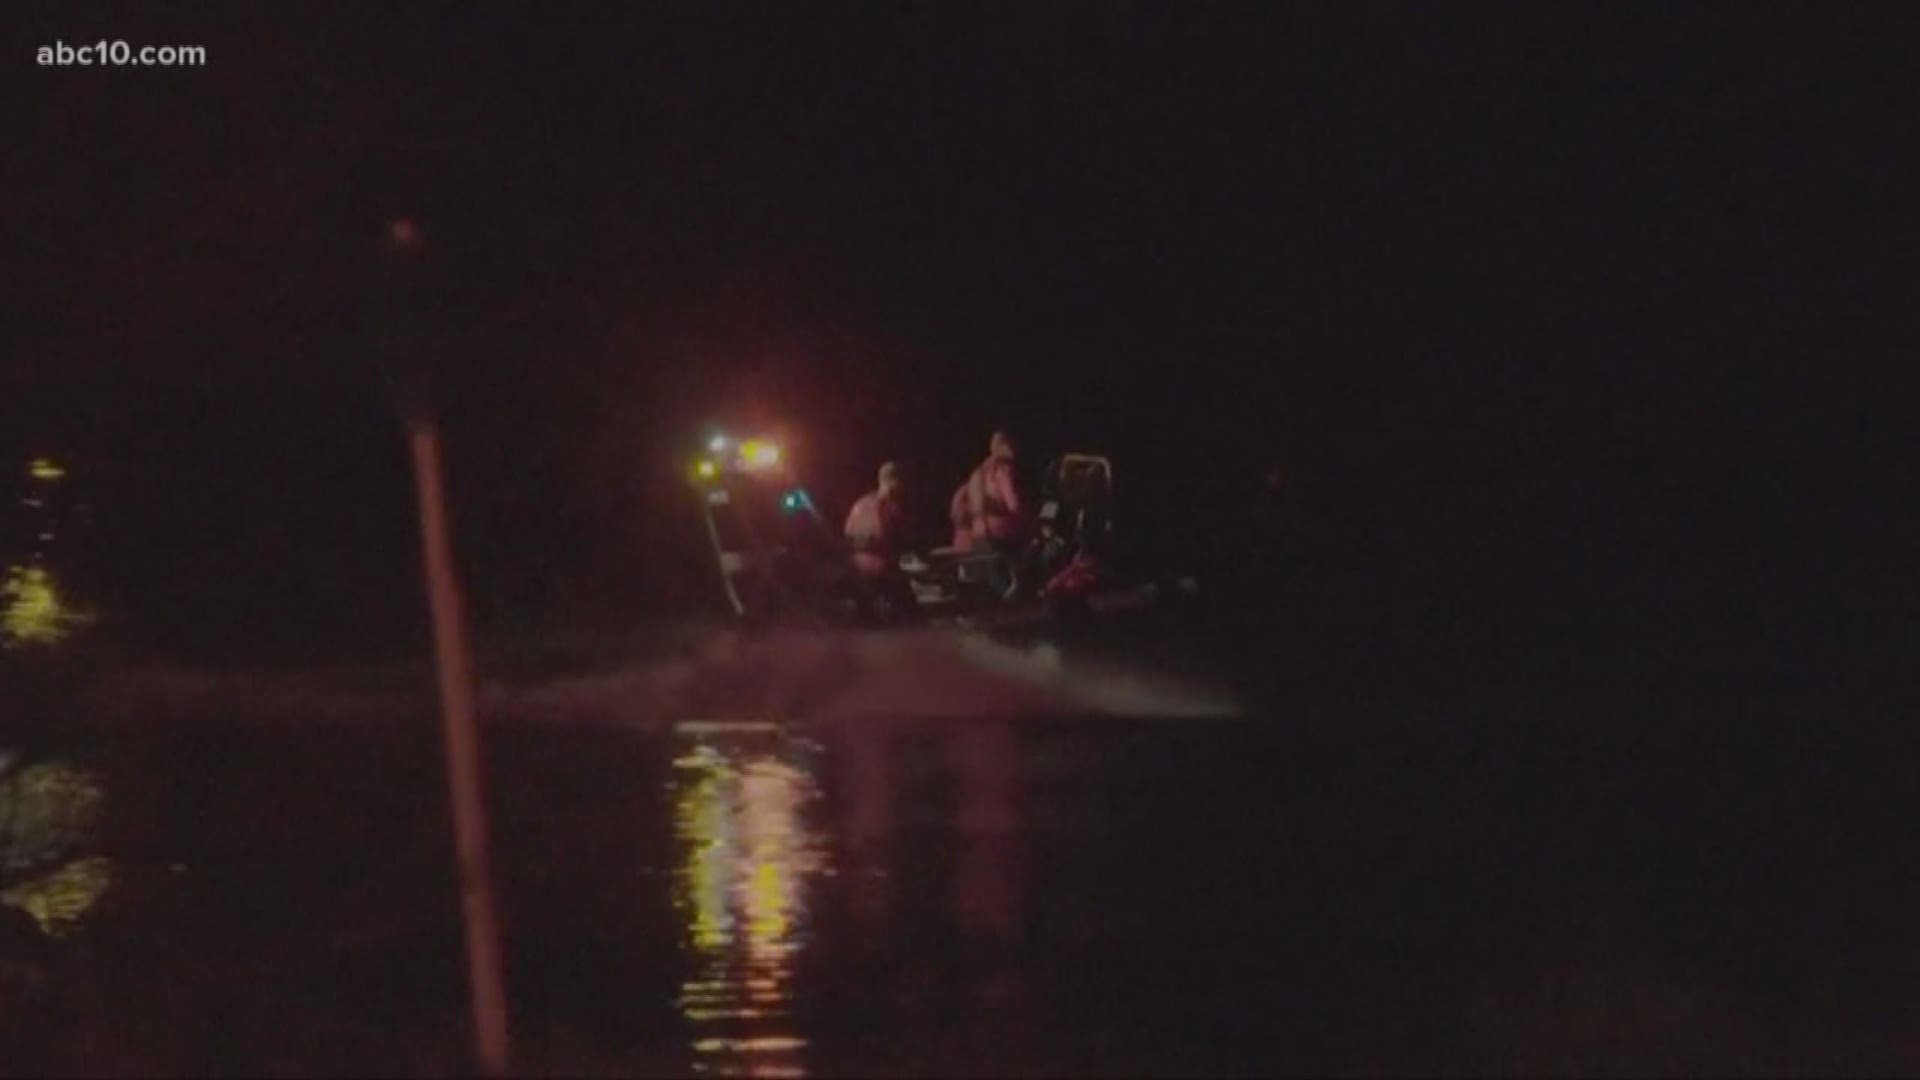 Recovery crews were called in to search for a vehicle that reportedly flew off westbound Highway 50 bridge and ended up in the Sacramento River, Tuesday night.